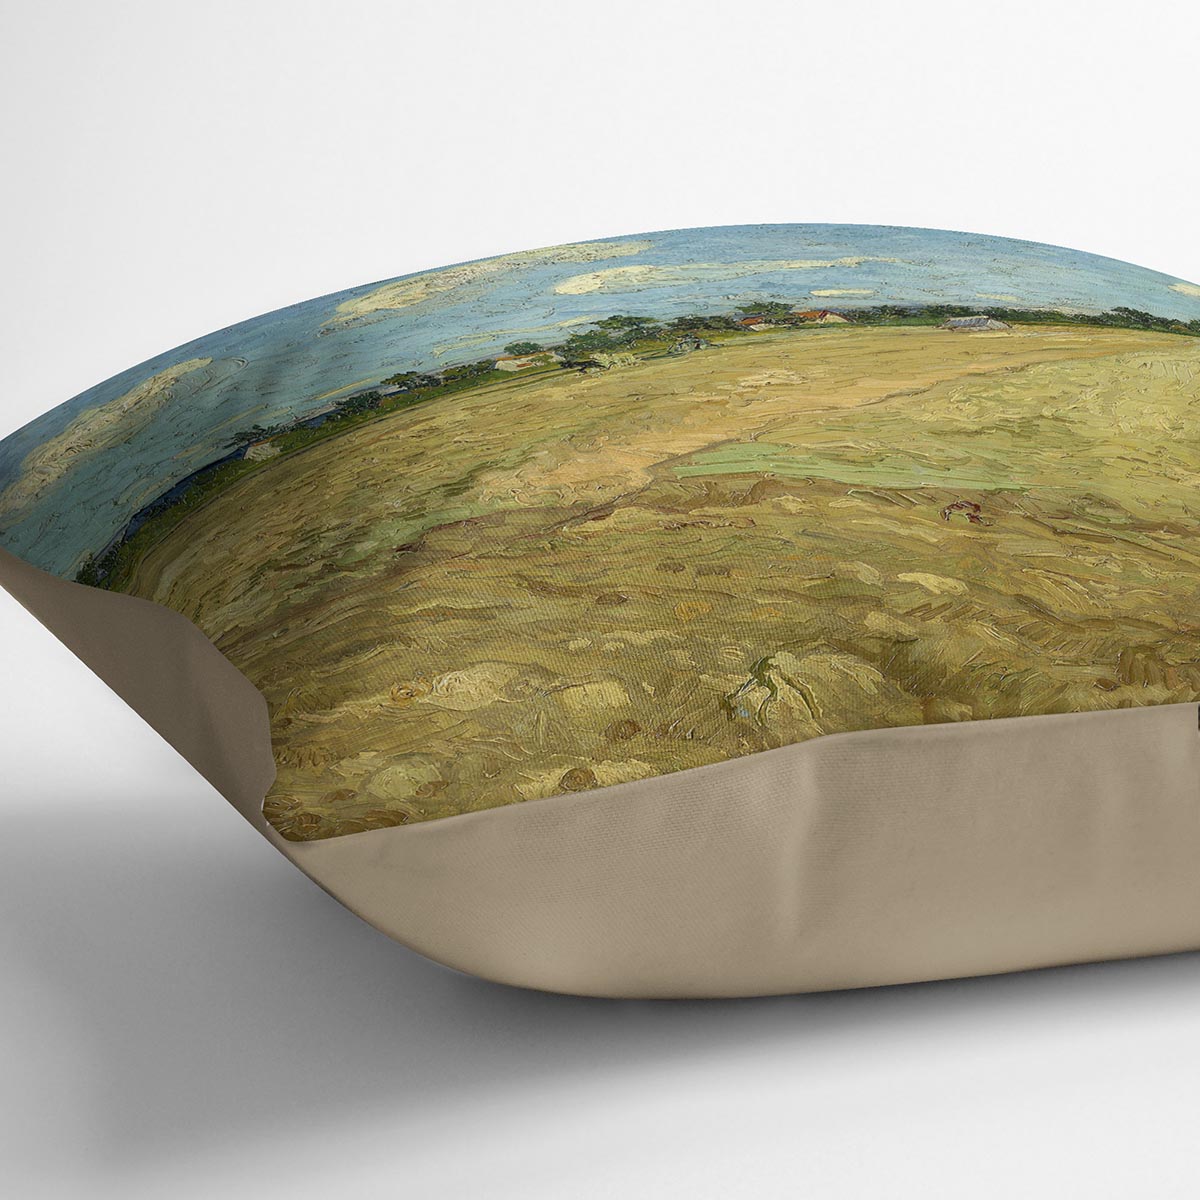 Ploughed fields by Van Gogh Cushion